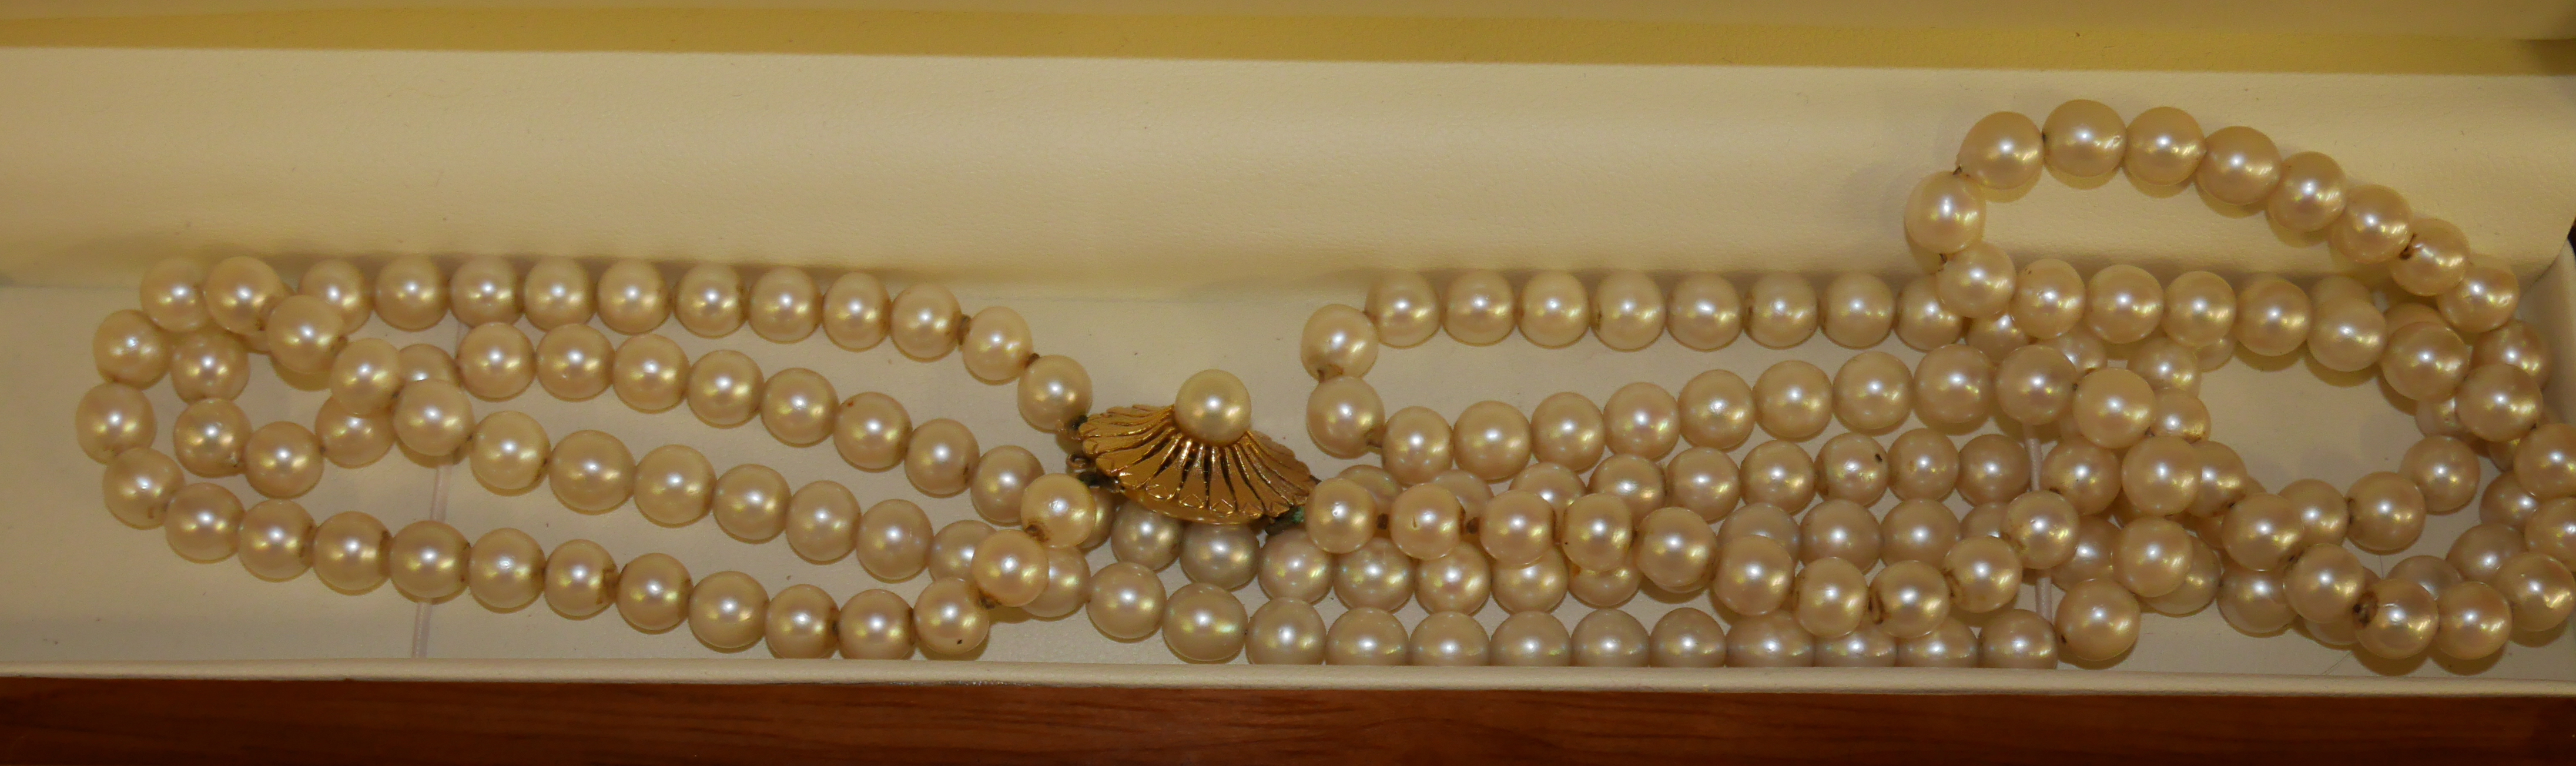 Pearls in case